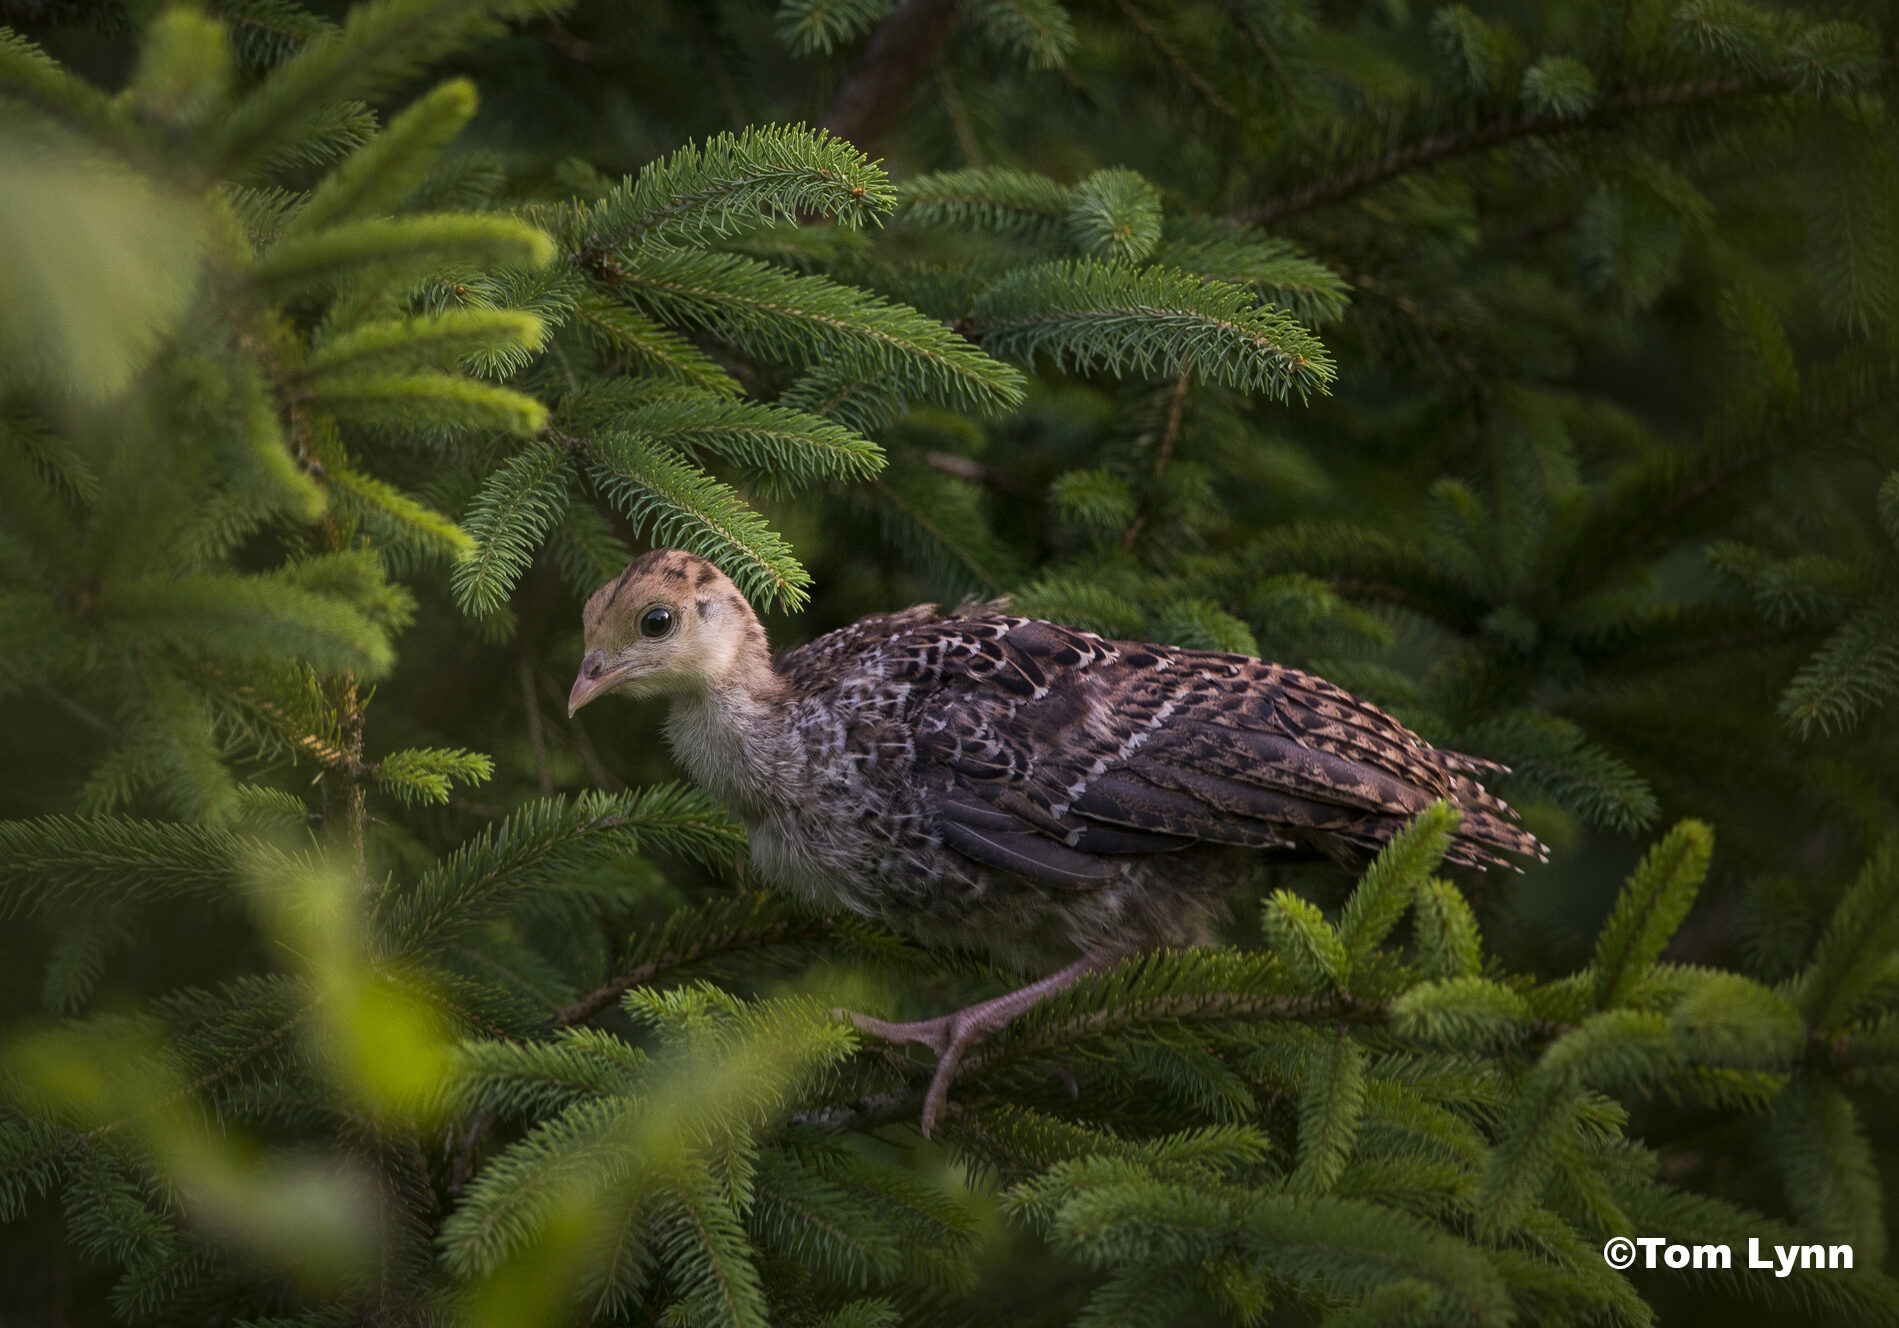 A small bird sits in an evergreen tree